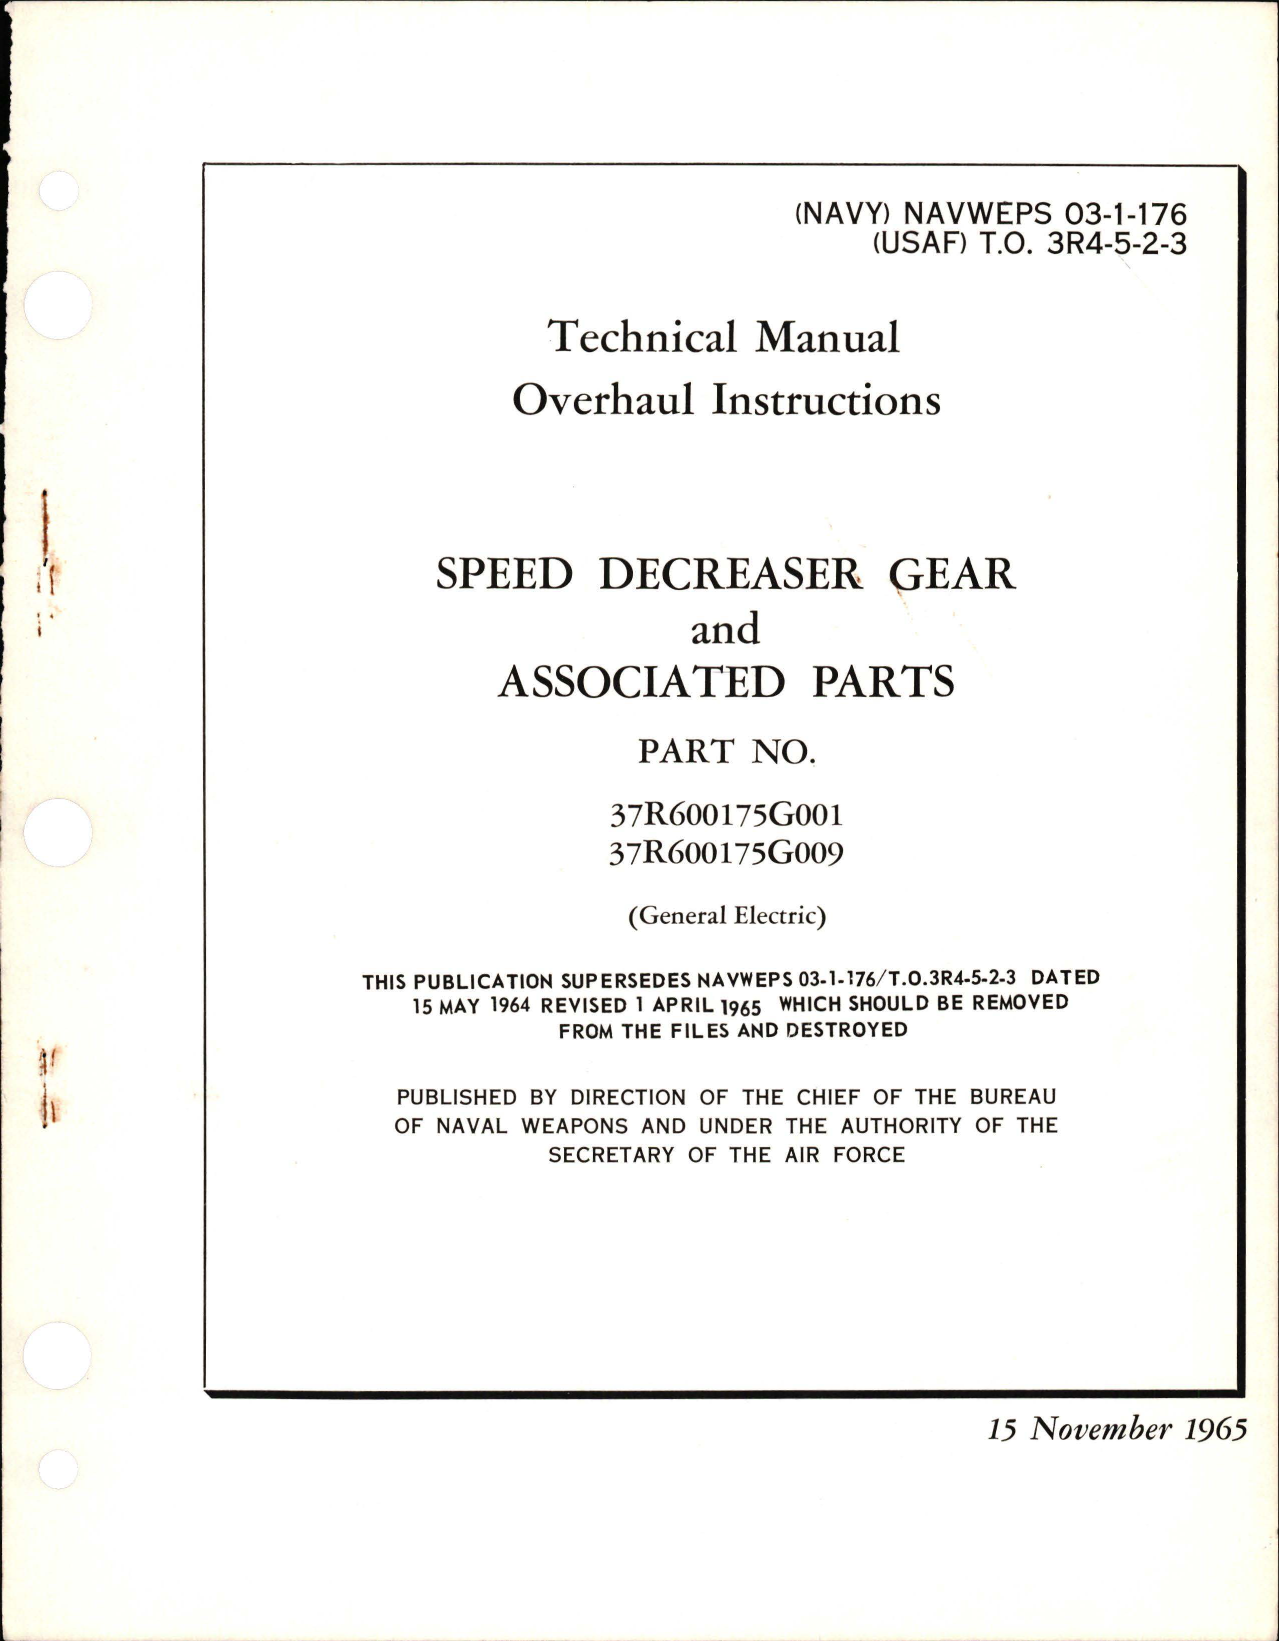 Sample page 1 from AirCorps Library document: Overhaul Instructions for Speed Decreaser Gear and Associated Parts - Parts 37R600175G001 and 37R600175G009 